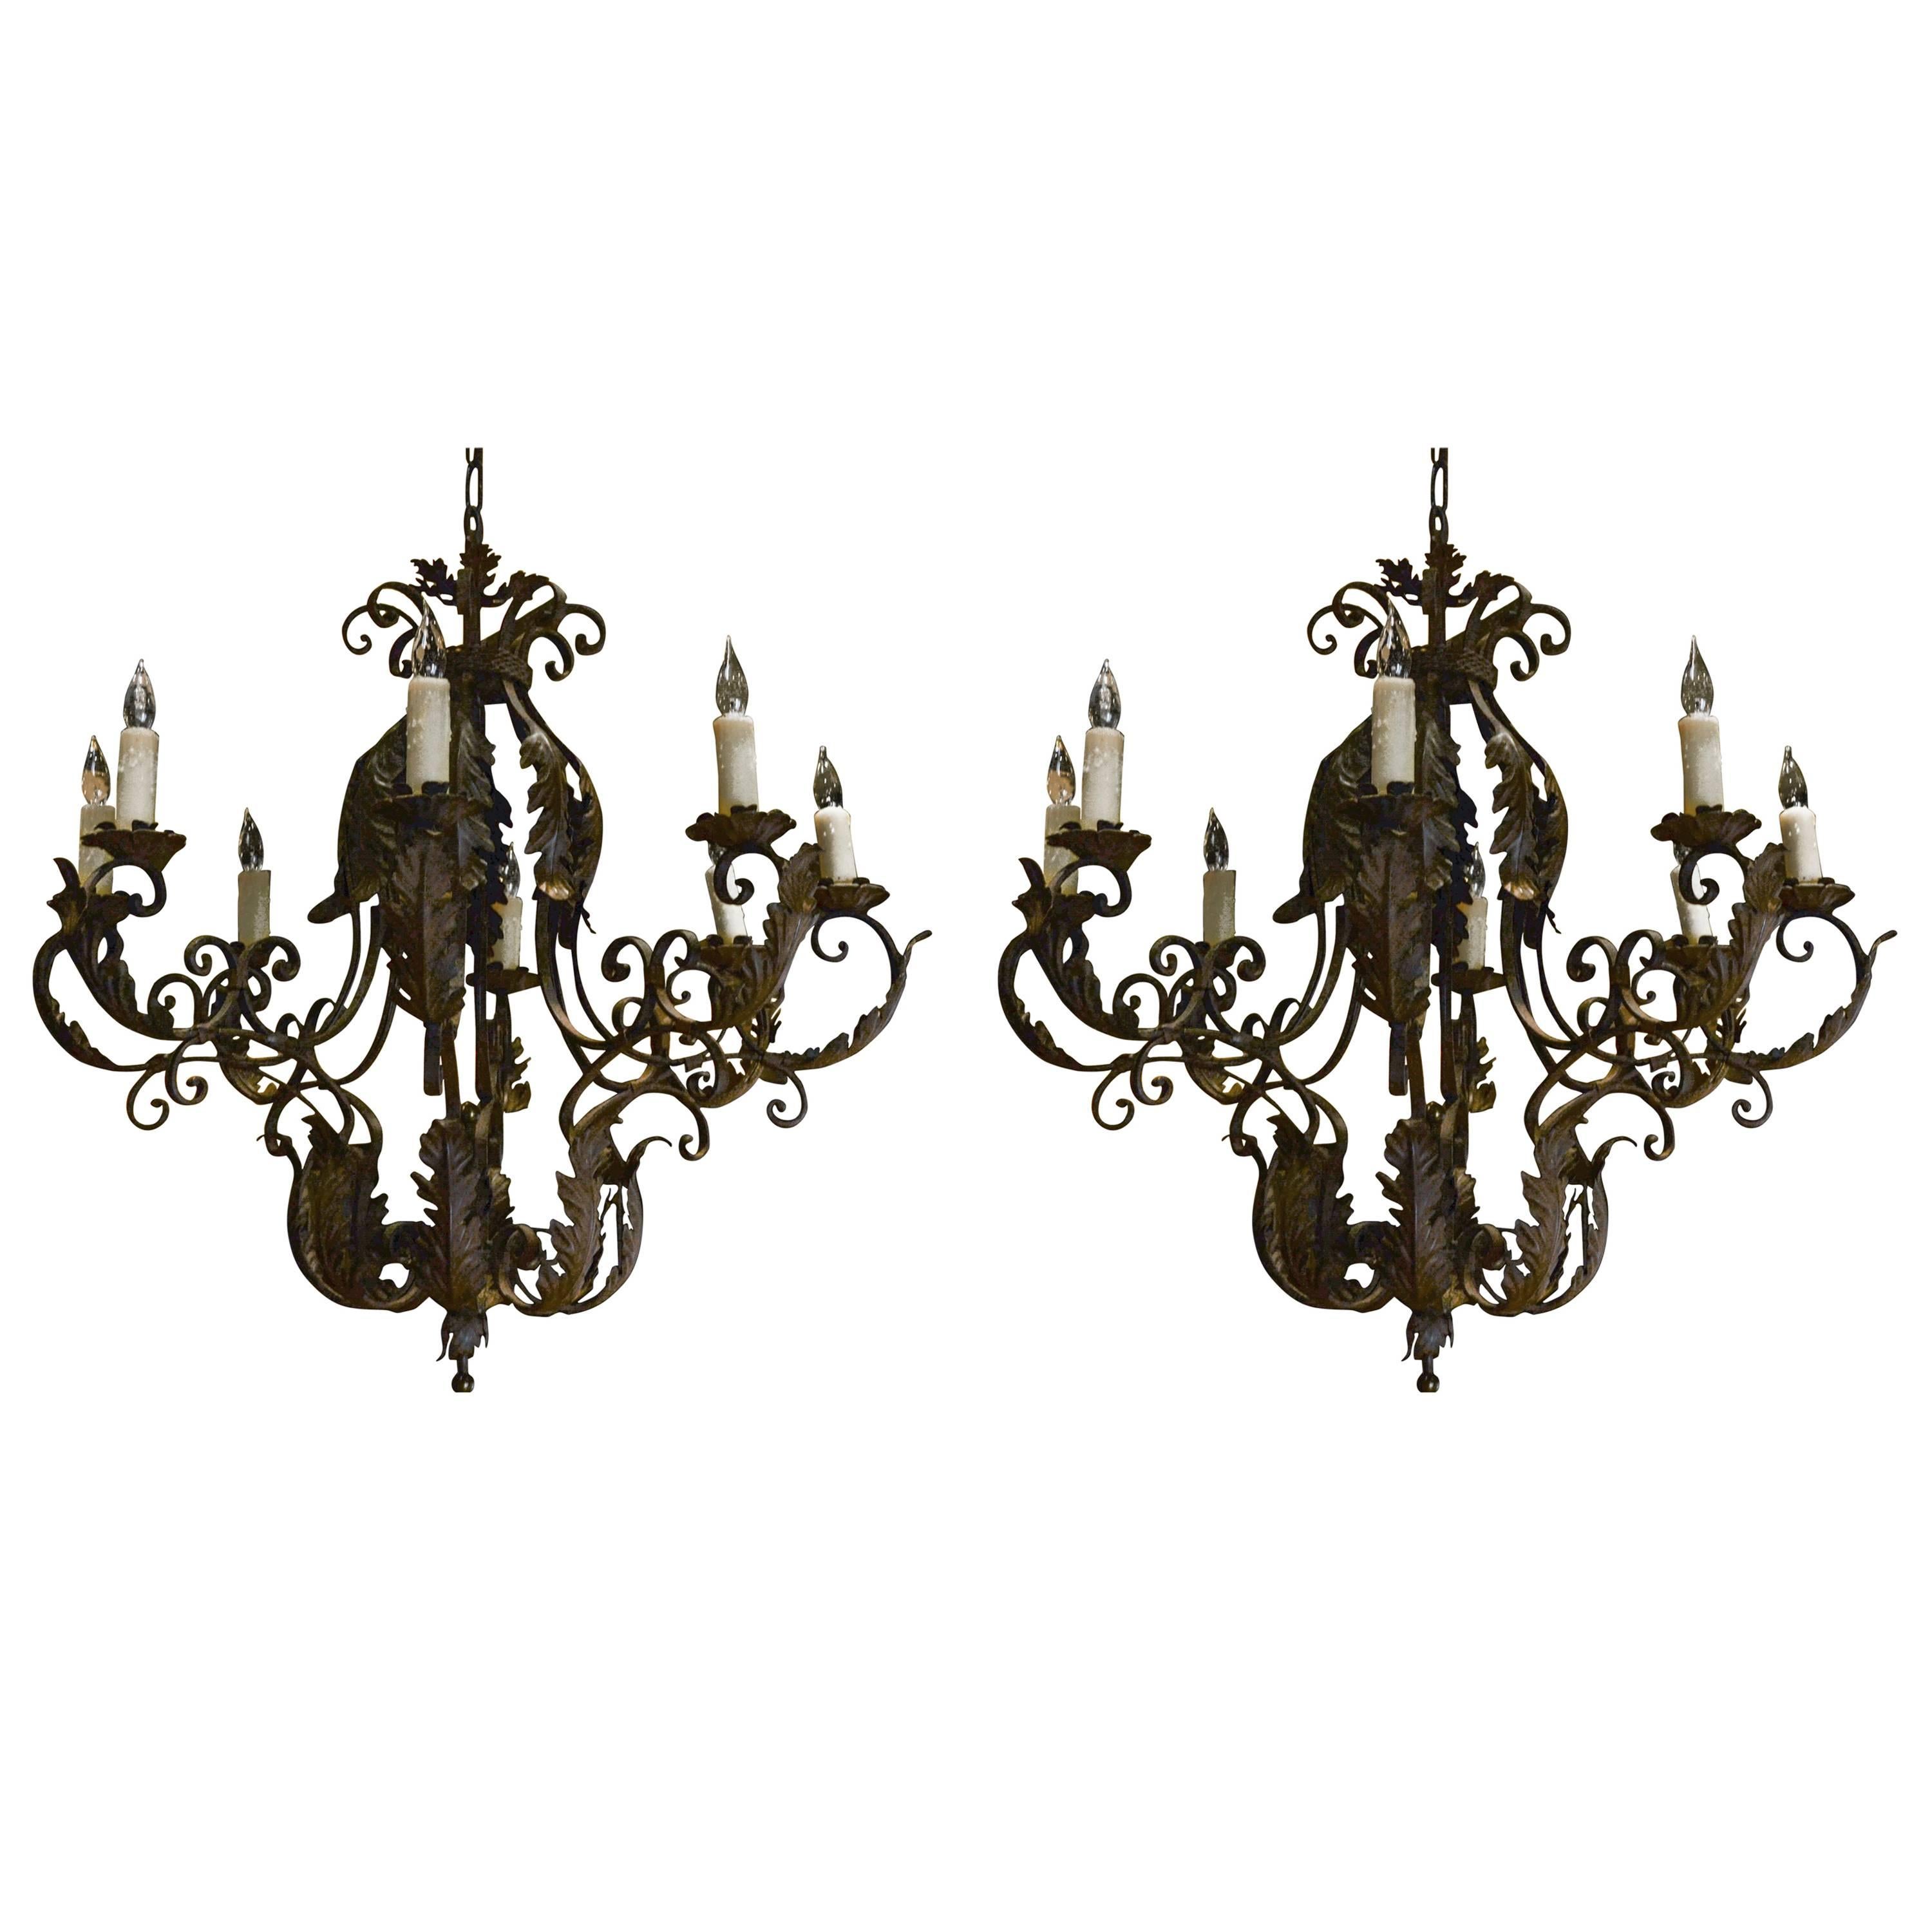 Pair of 1930s Italian Rococo Style Basket Form Tole and Iron Chandeliers